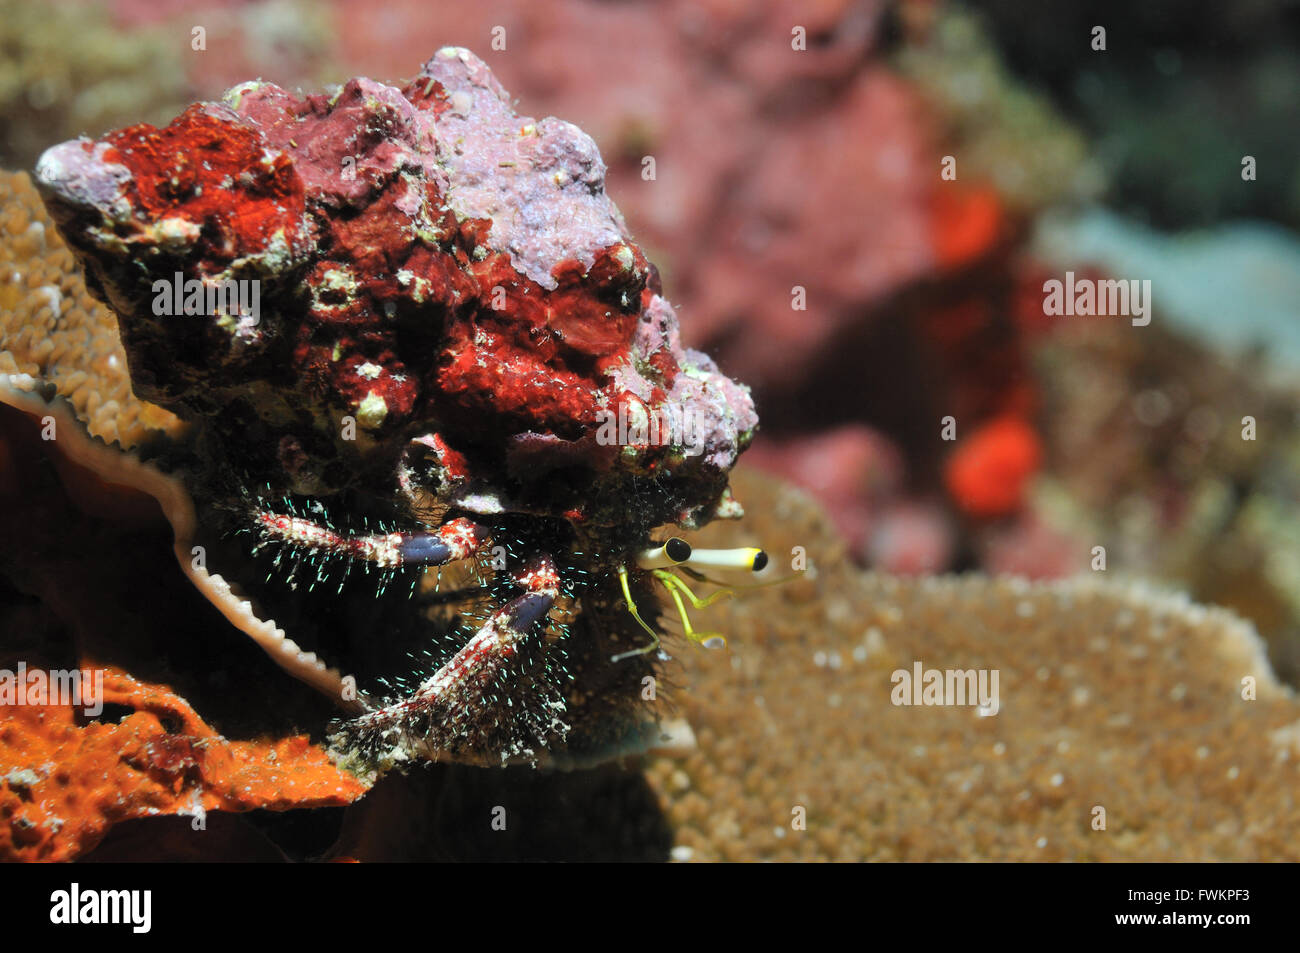 Reef hermit crab with a shabby shell on his back sitting on a piece of coral, Panglao, Philippines Stock Photo